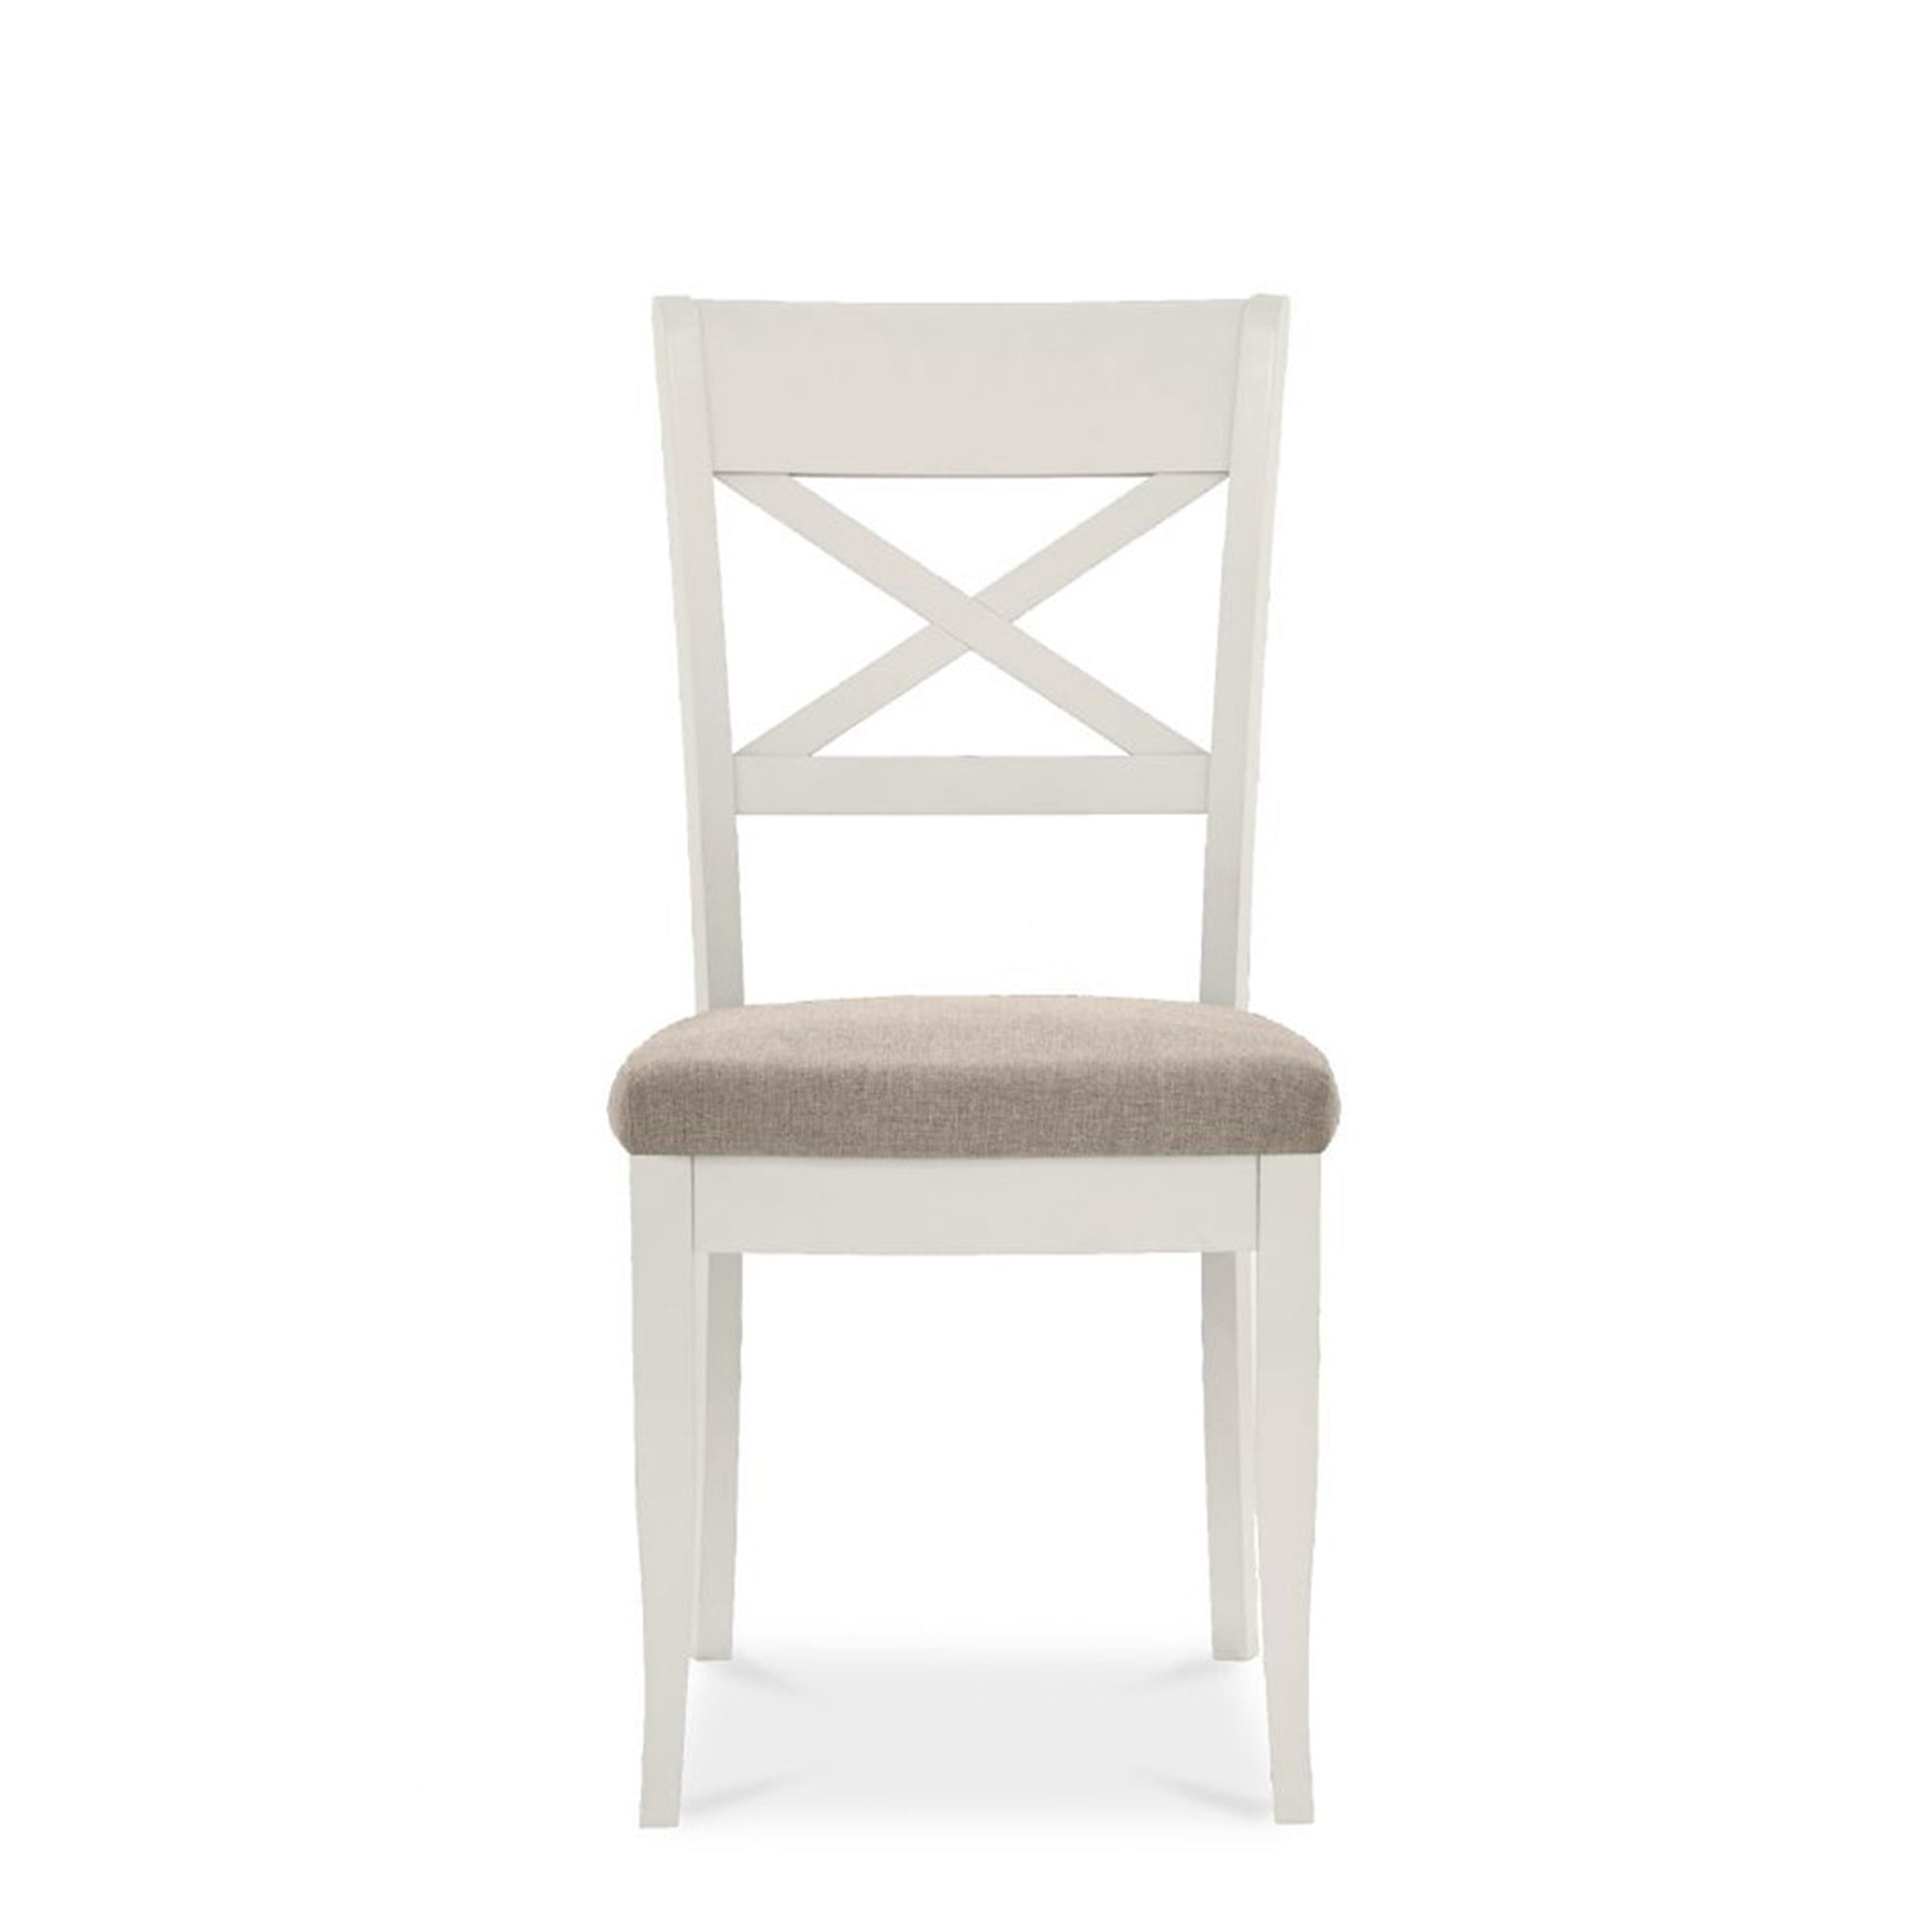 Chateau - Soft Grey x Back Chair In Pebble Fabric